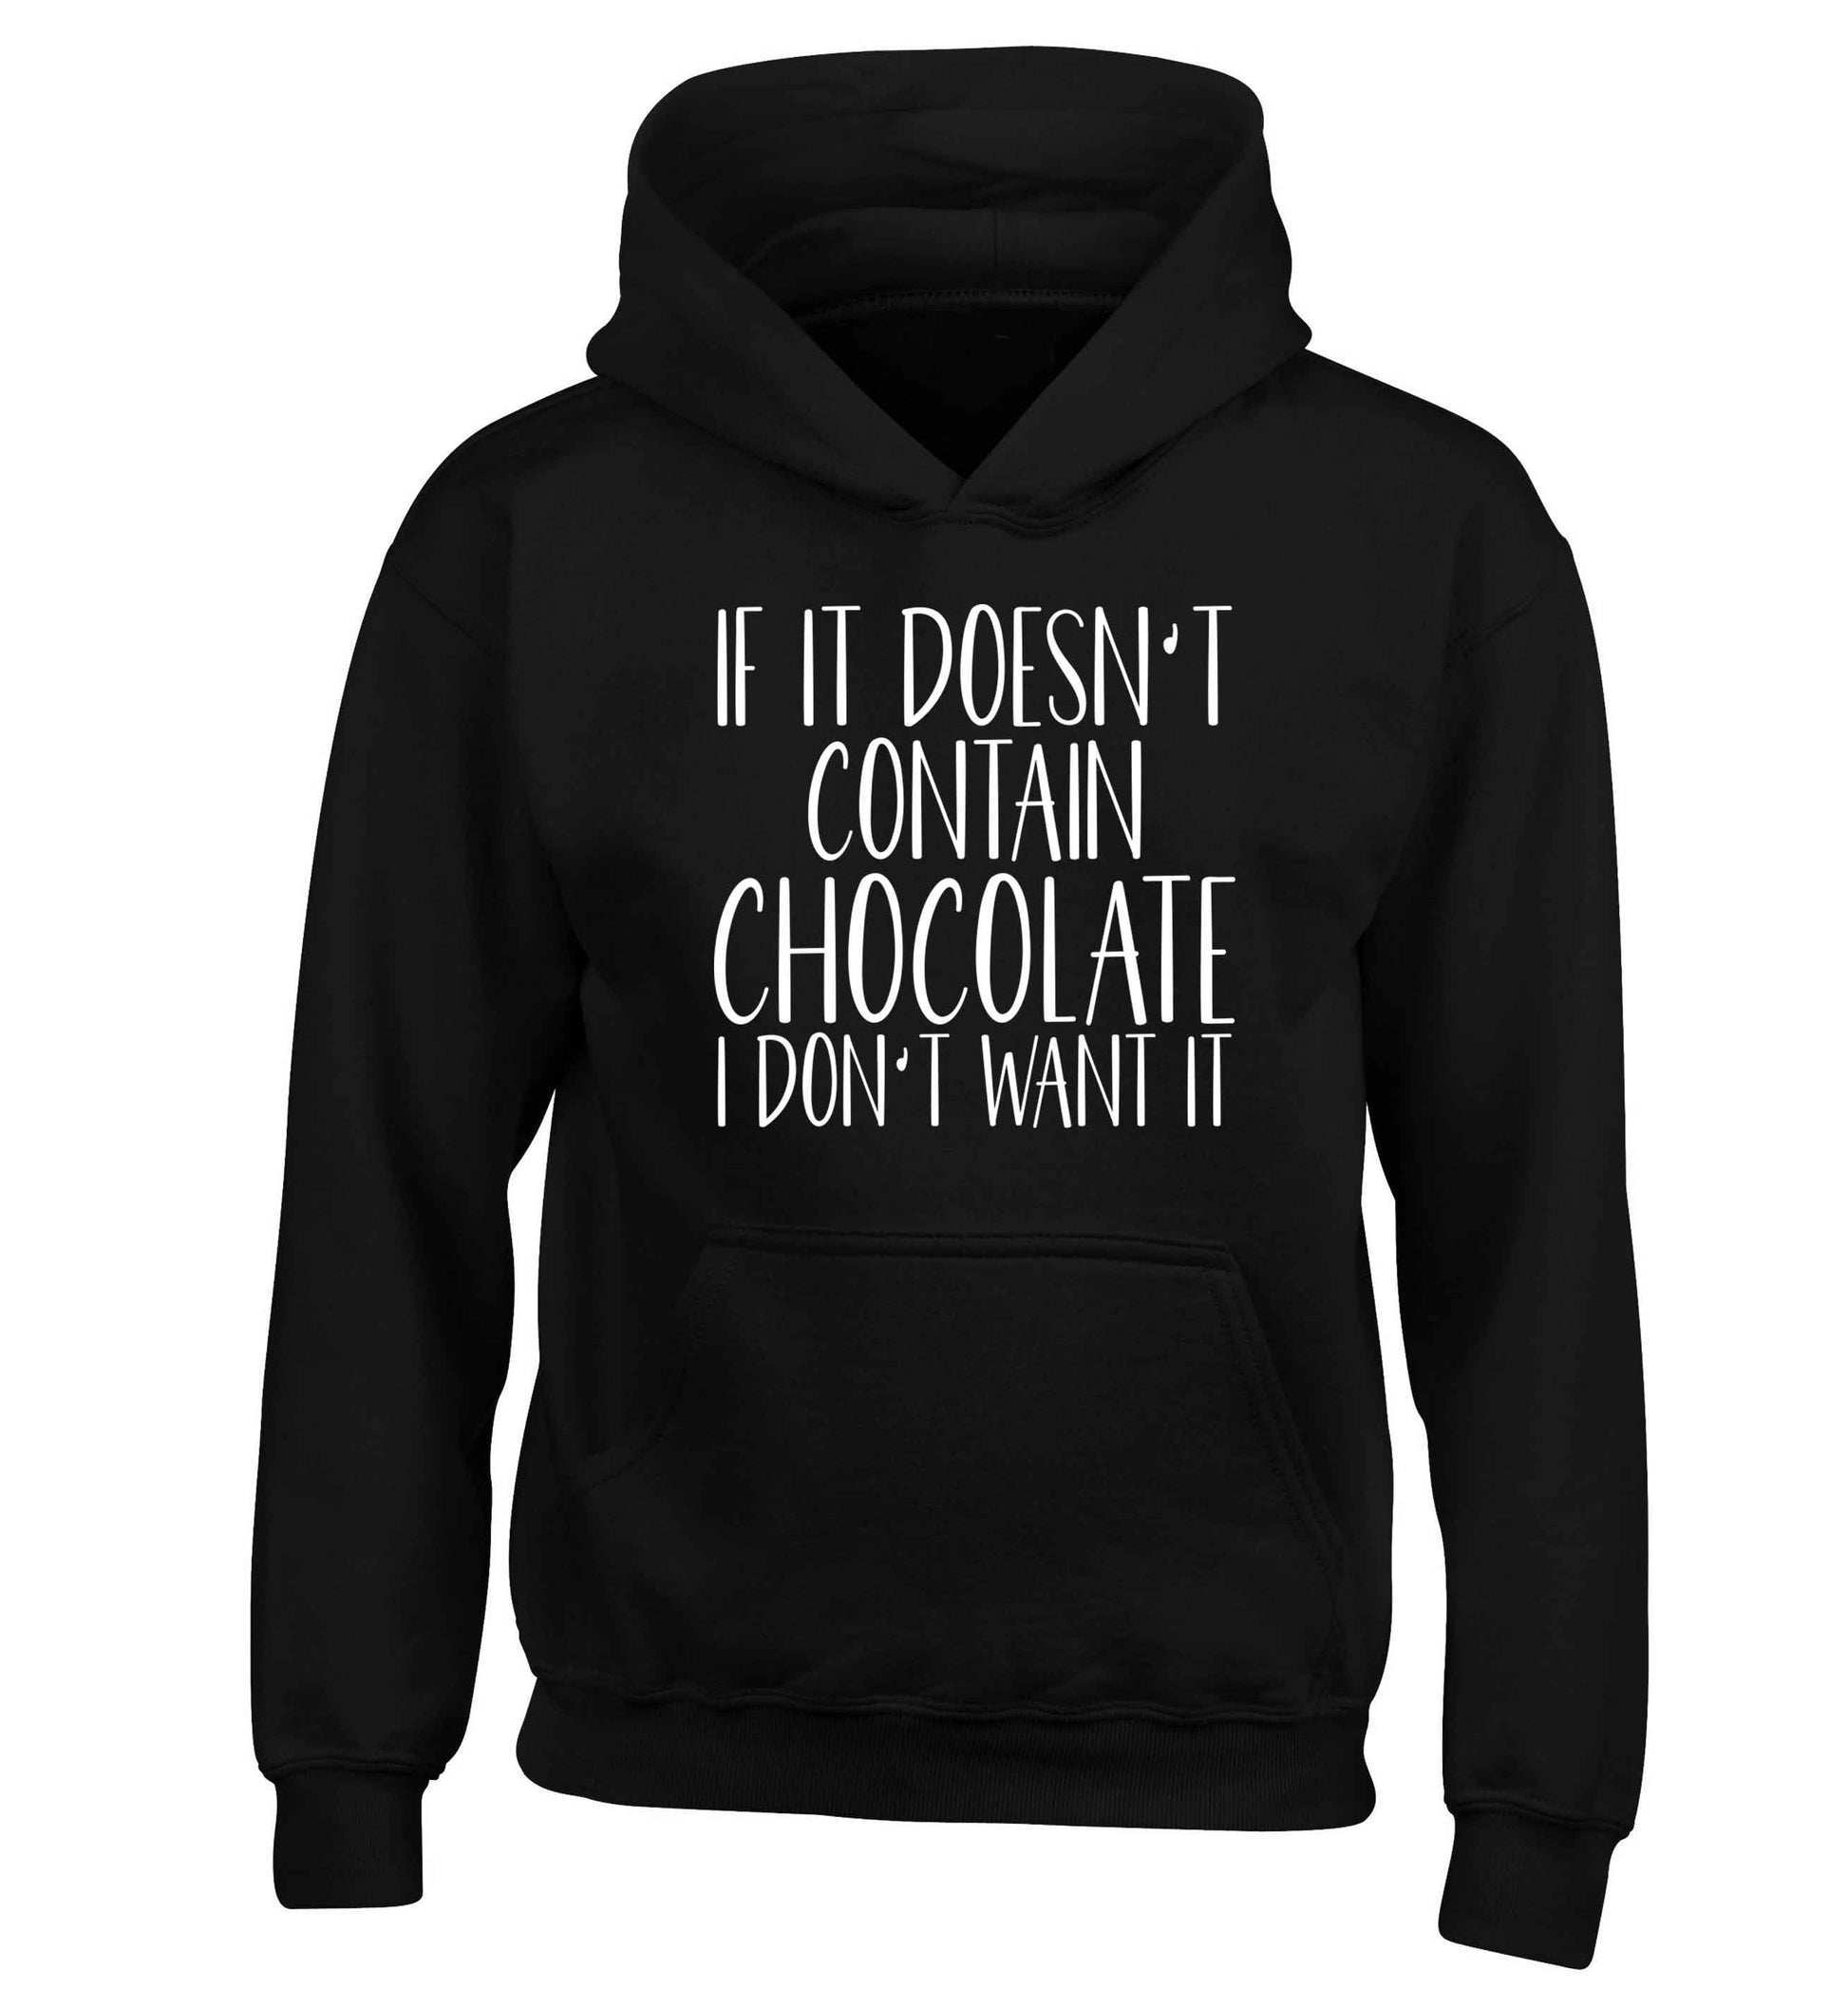 If it doesn't contain chocolate I don't want it children's black hoodie 12-13 Years